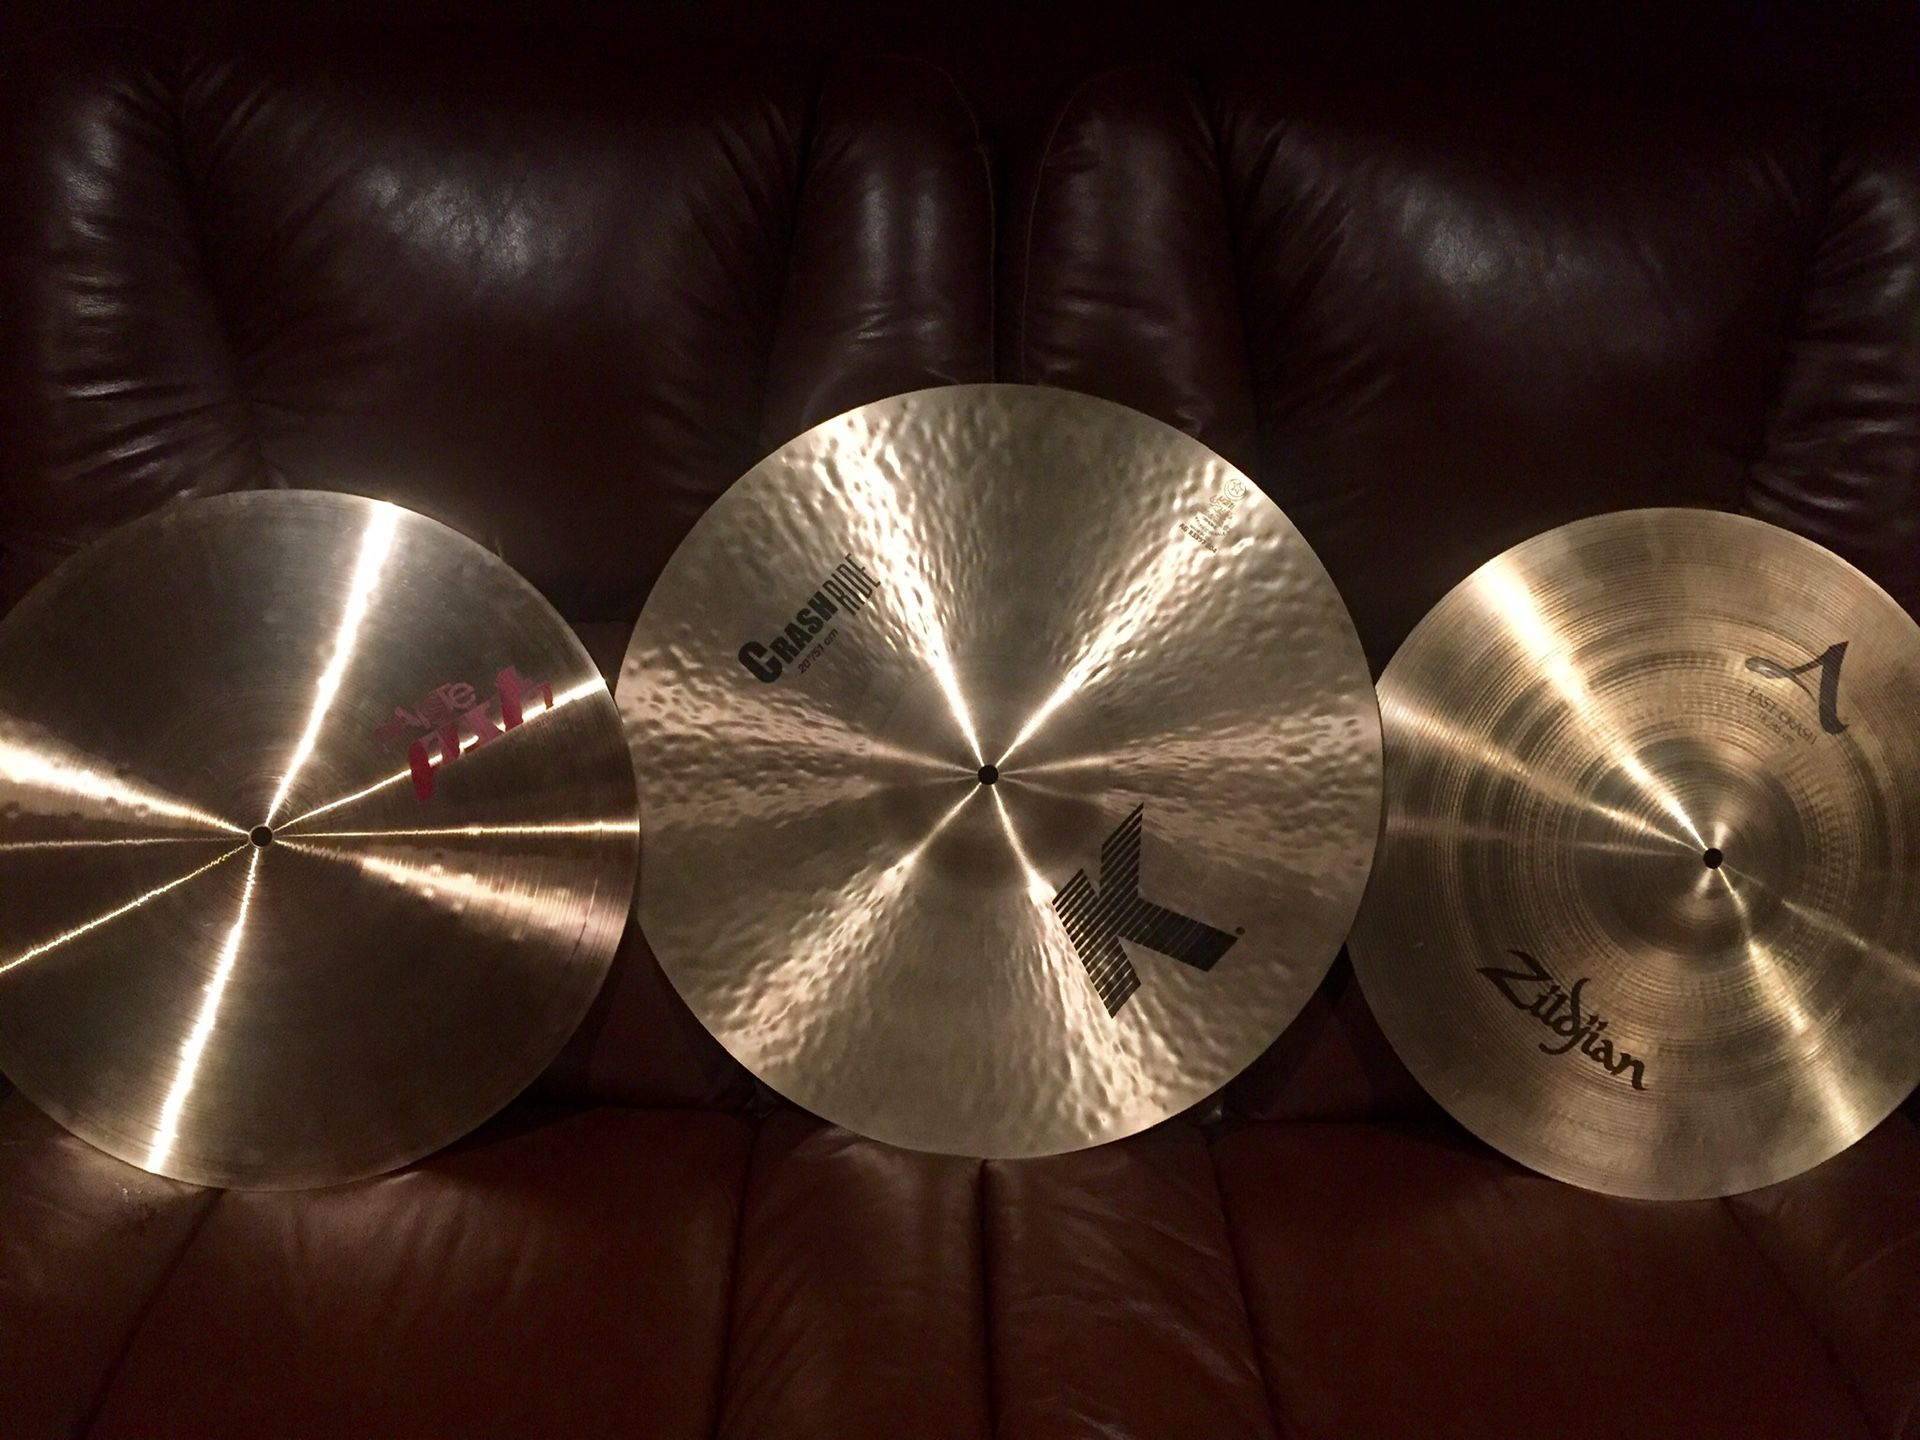 Cymbal roundup all three for $333